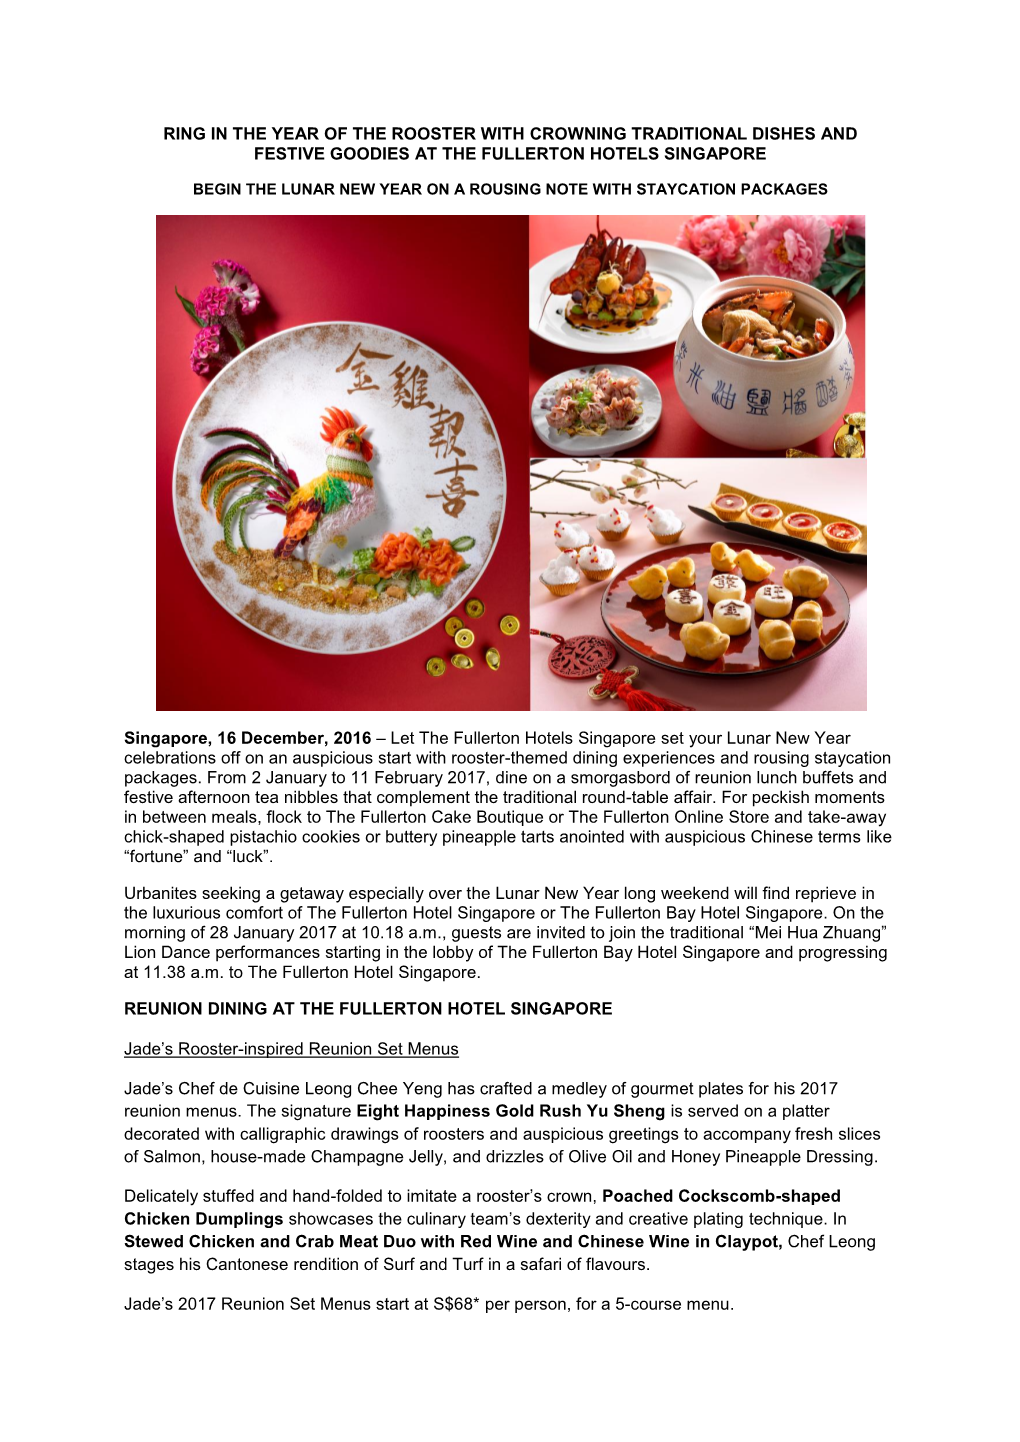 Ring in the Year of the Rooster with Crowning Traditional Dishes and Festive Goodies at the Fullerton Hotels Singapore